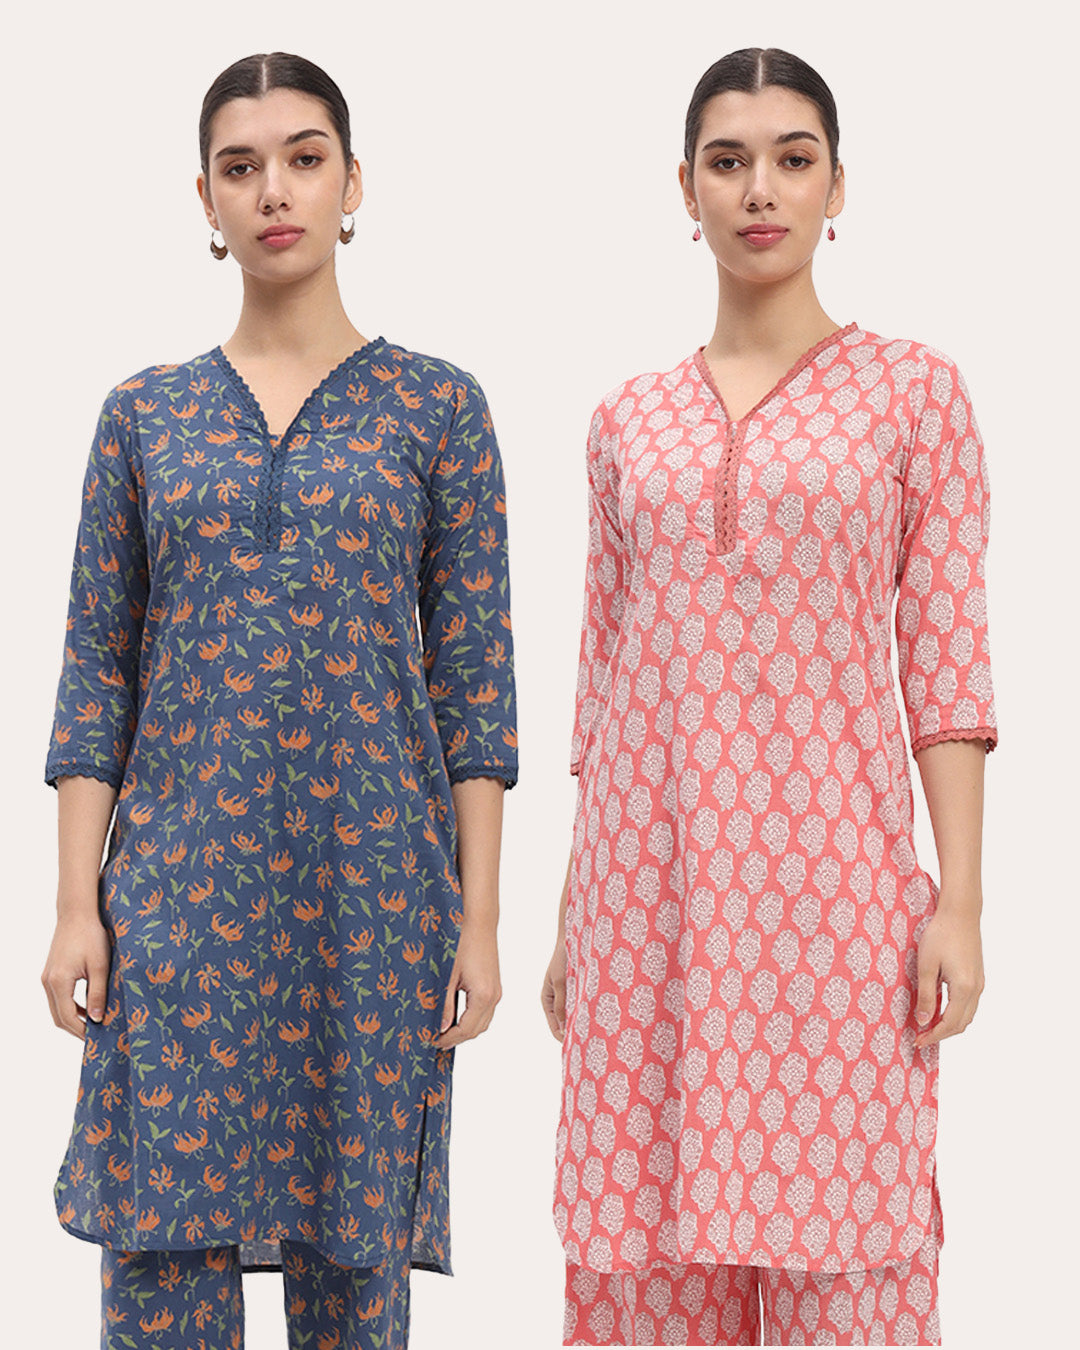 Combo: Fire Lillies & Flora Fables Lace Affair Printed Kurta (Without Bottoms)